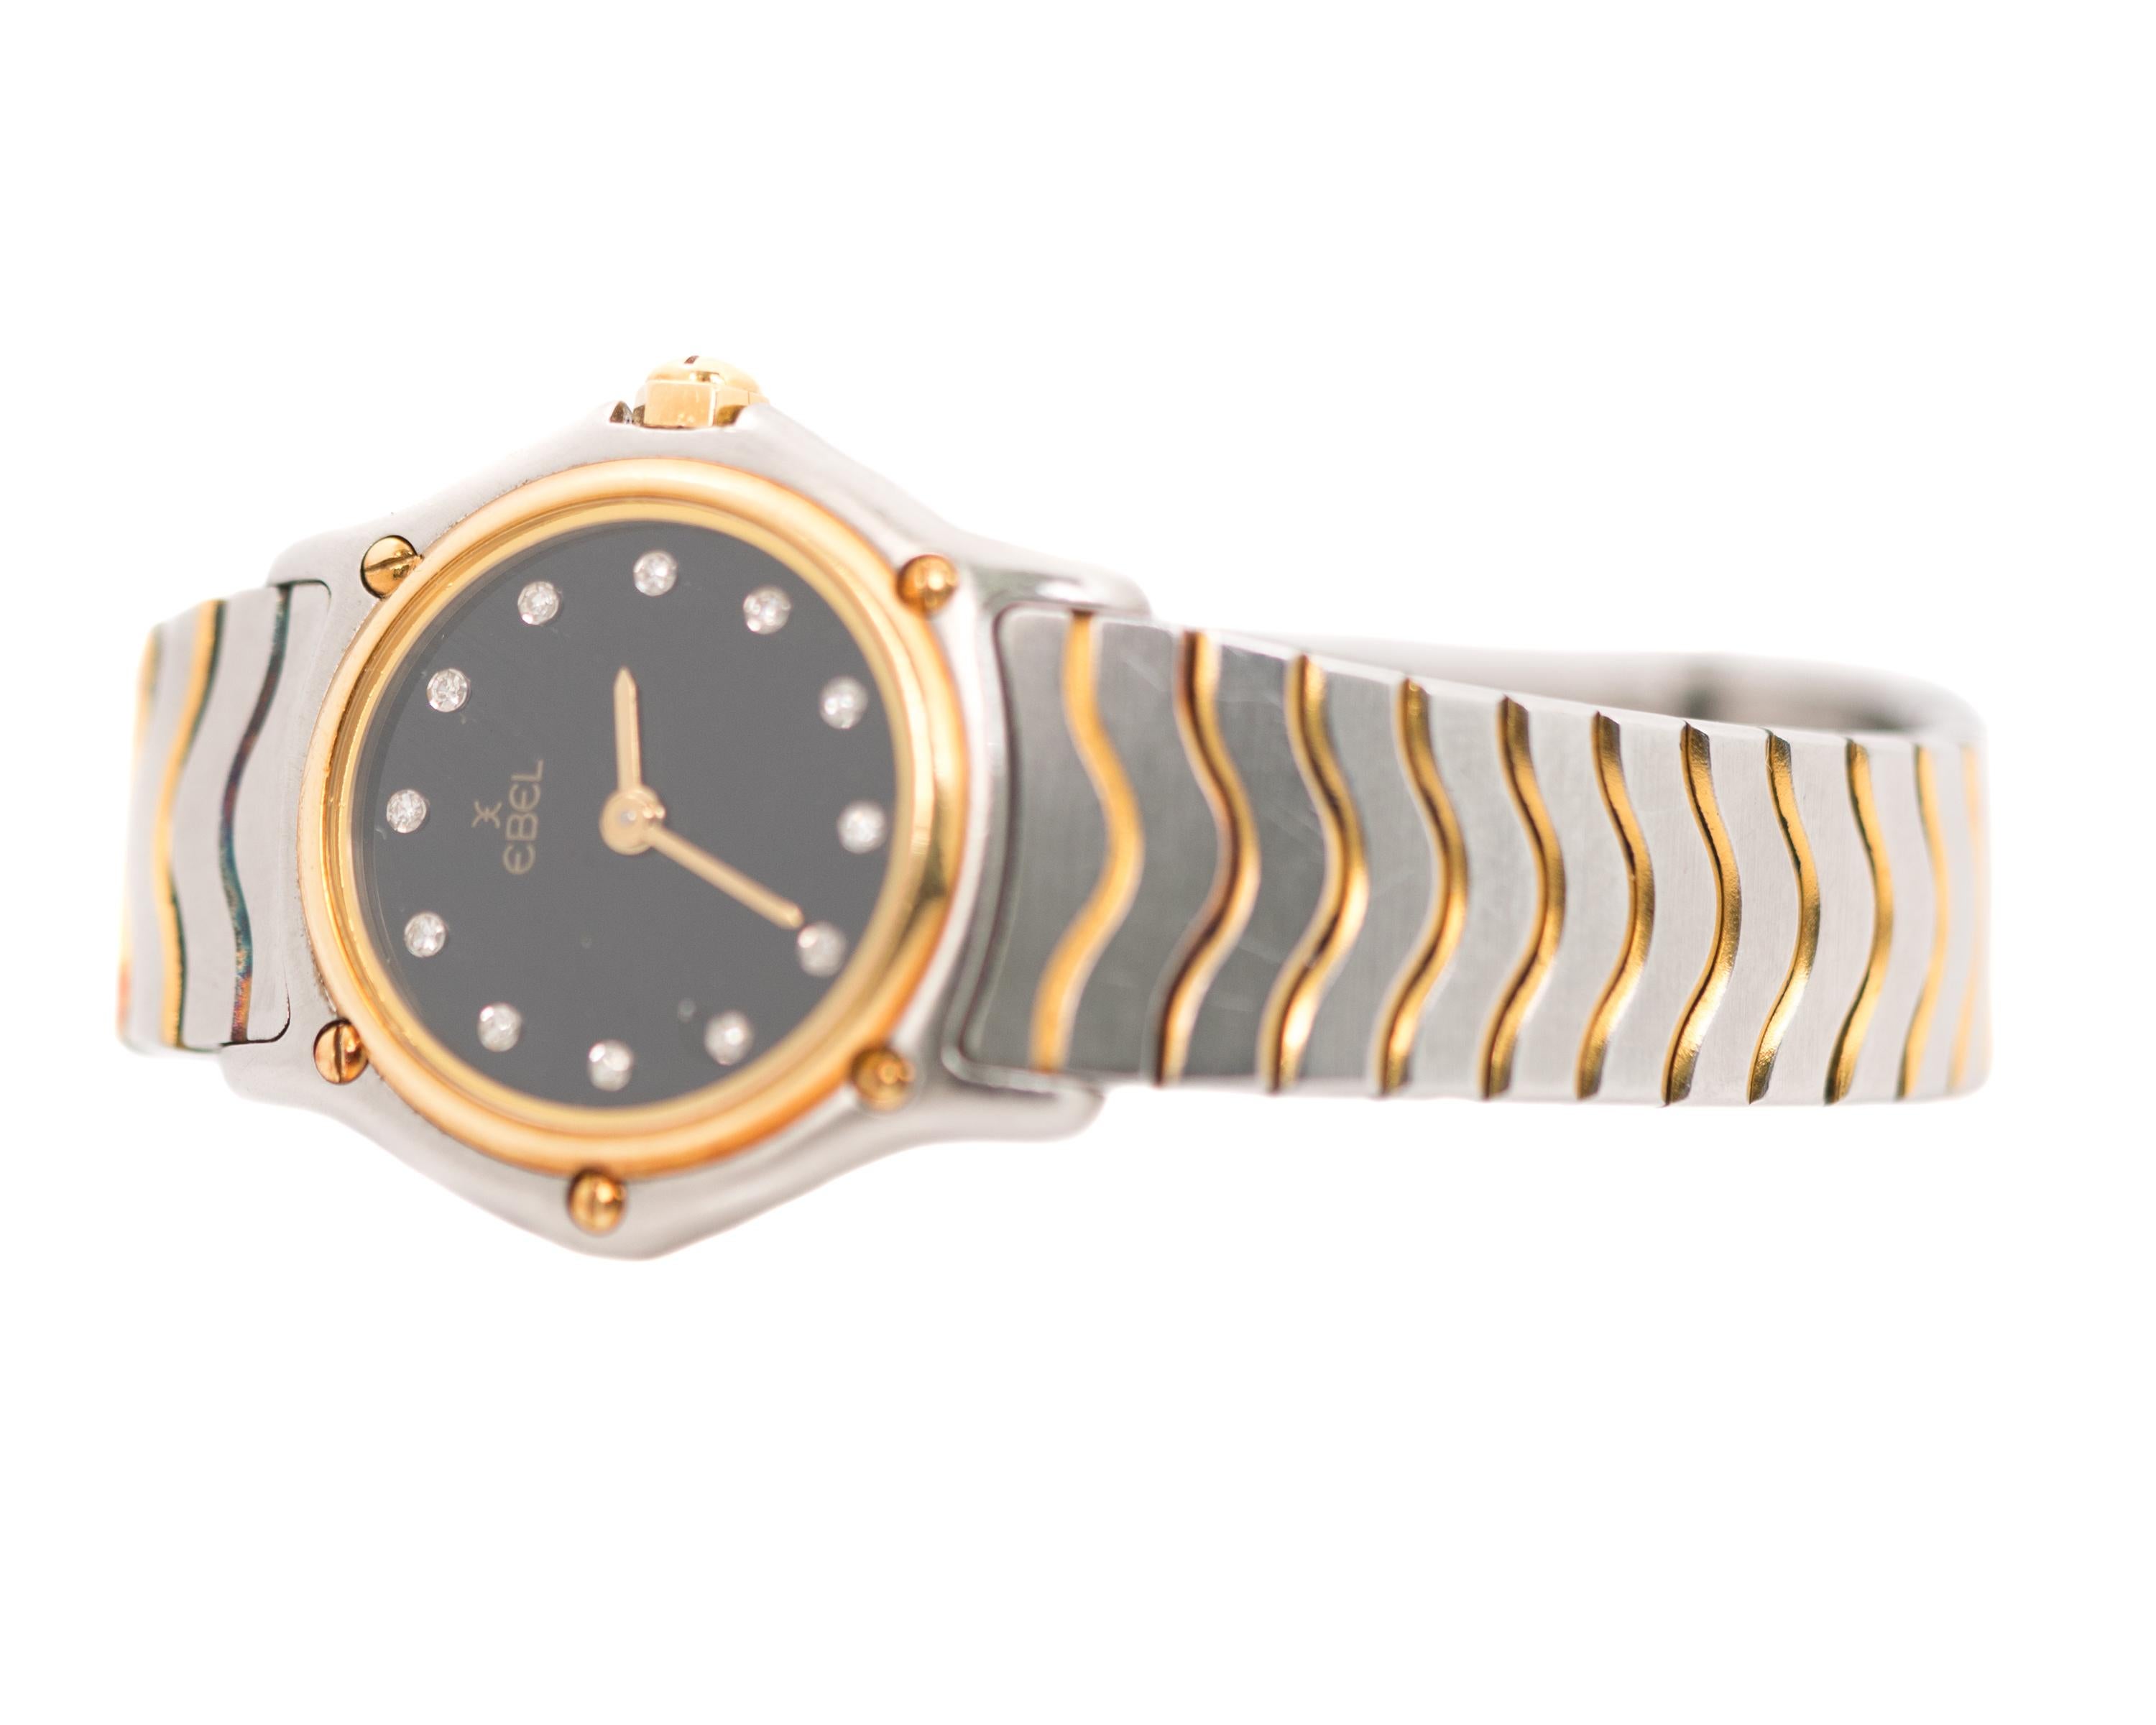 1990s Ebel Ladies Diamond Wrist Watch Classic Wave- 18 karat Yellow Gold, Stainless Steel, Diamonds

Features:
Reference #1057901
Diameter: 23 millimeters without crown, 25 millimeters with crown
Factory Diamond Dial
18 Karat Yellow Gold Bezel
Black